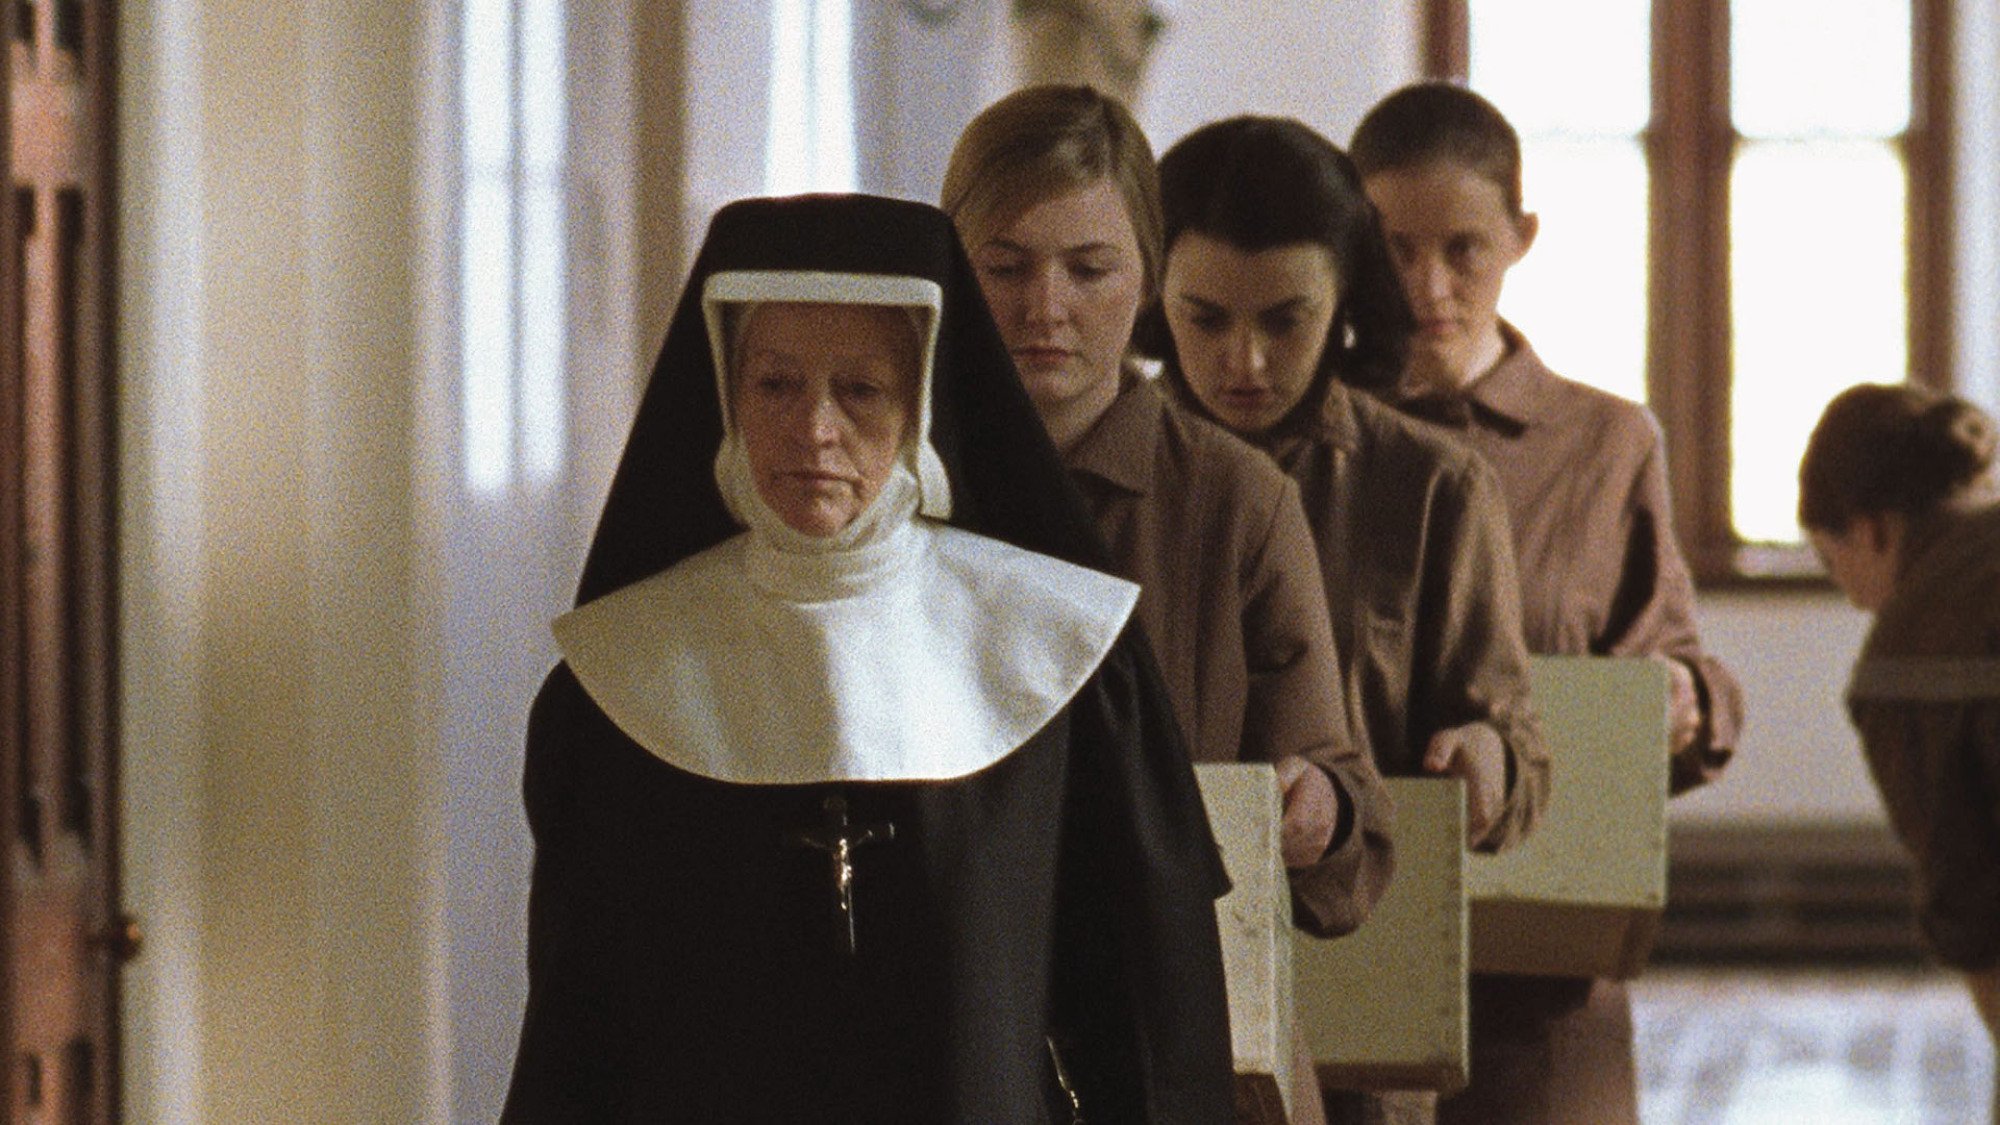 A still from 2002's "The Magdalene Sisters" by Peter Mullan showing a nun leading three women.